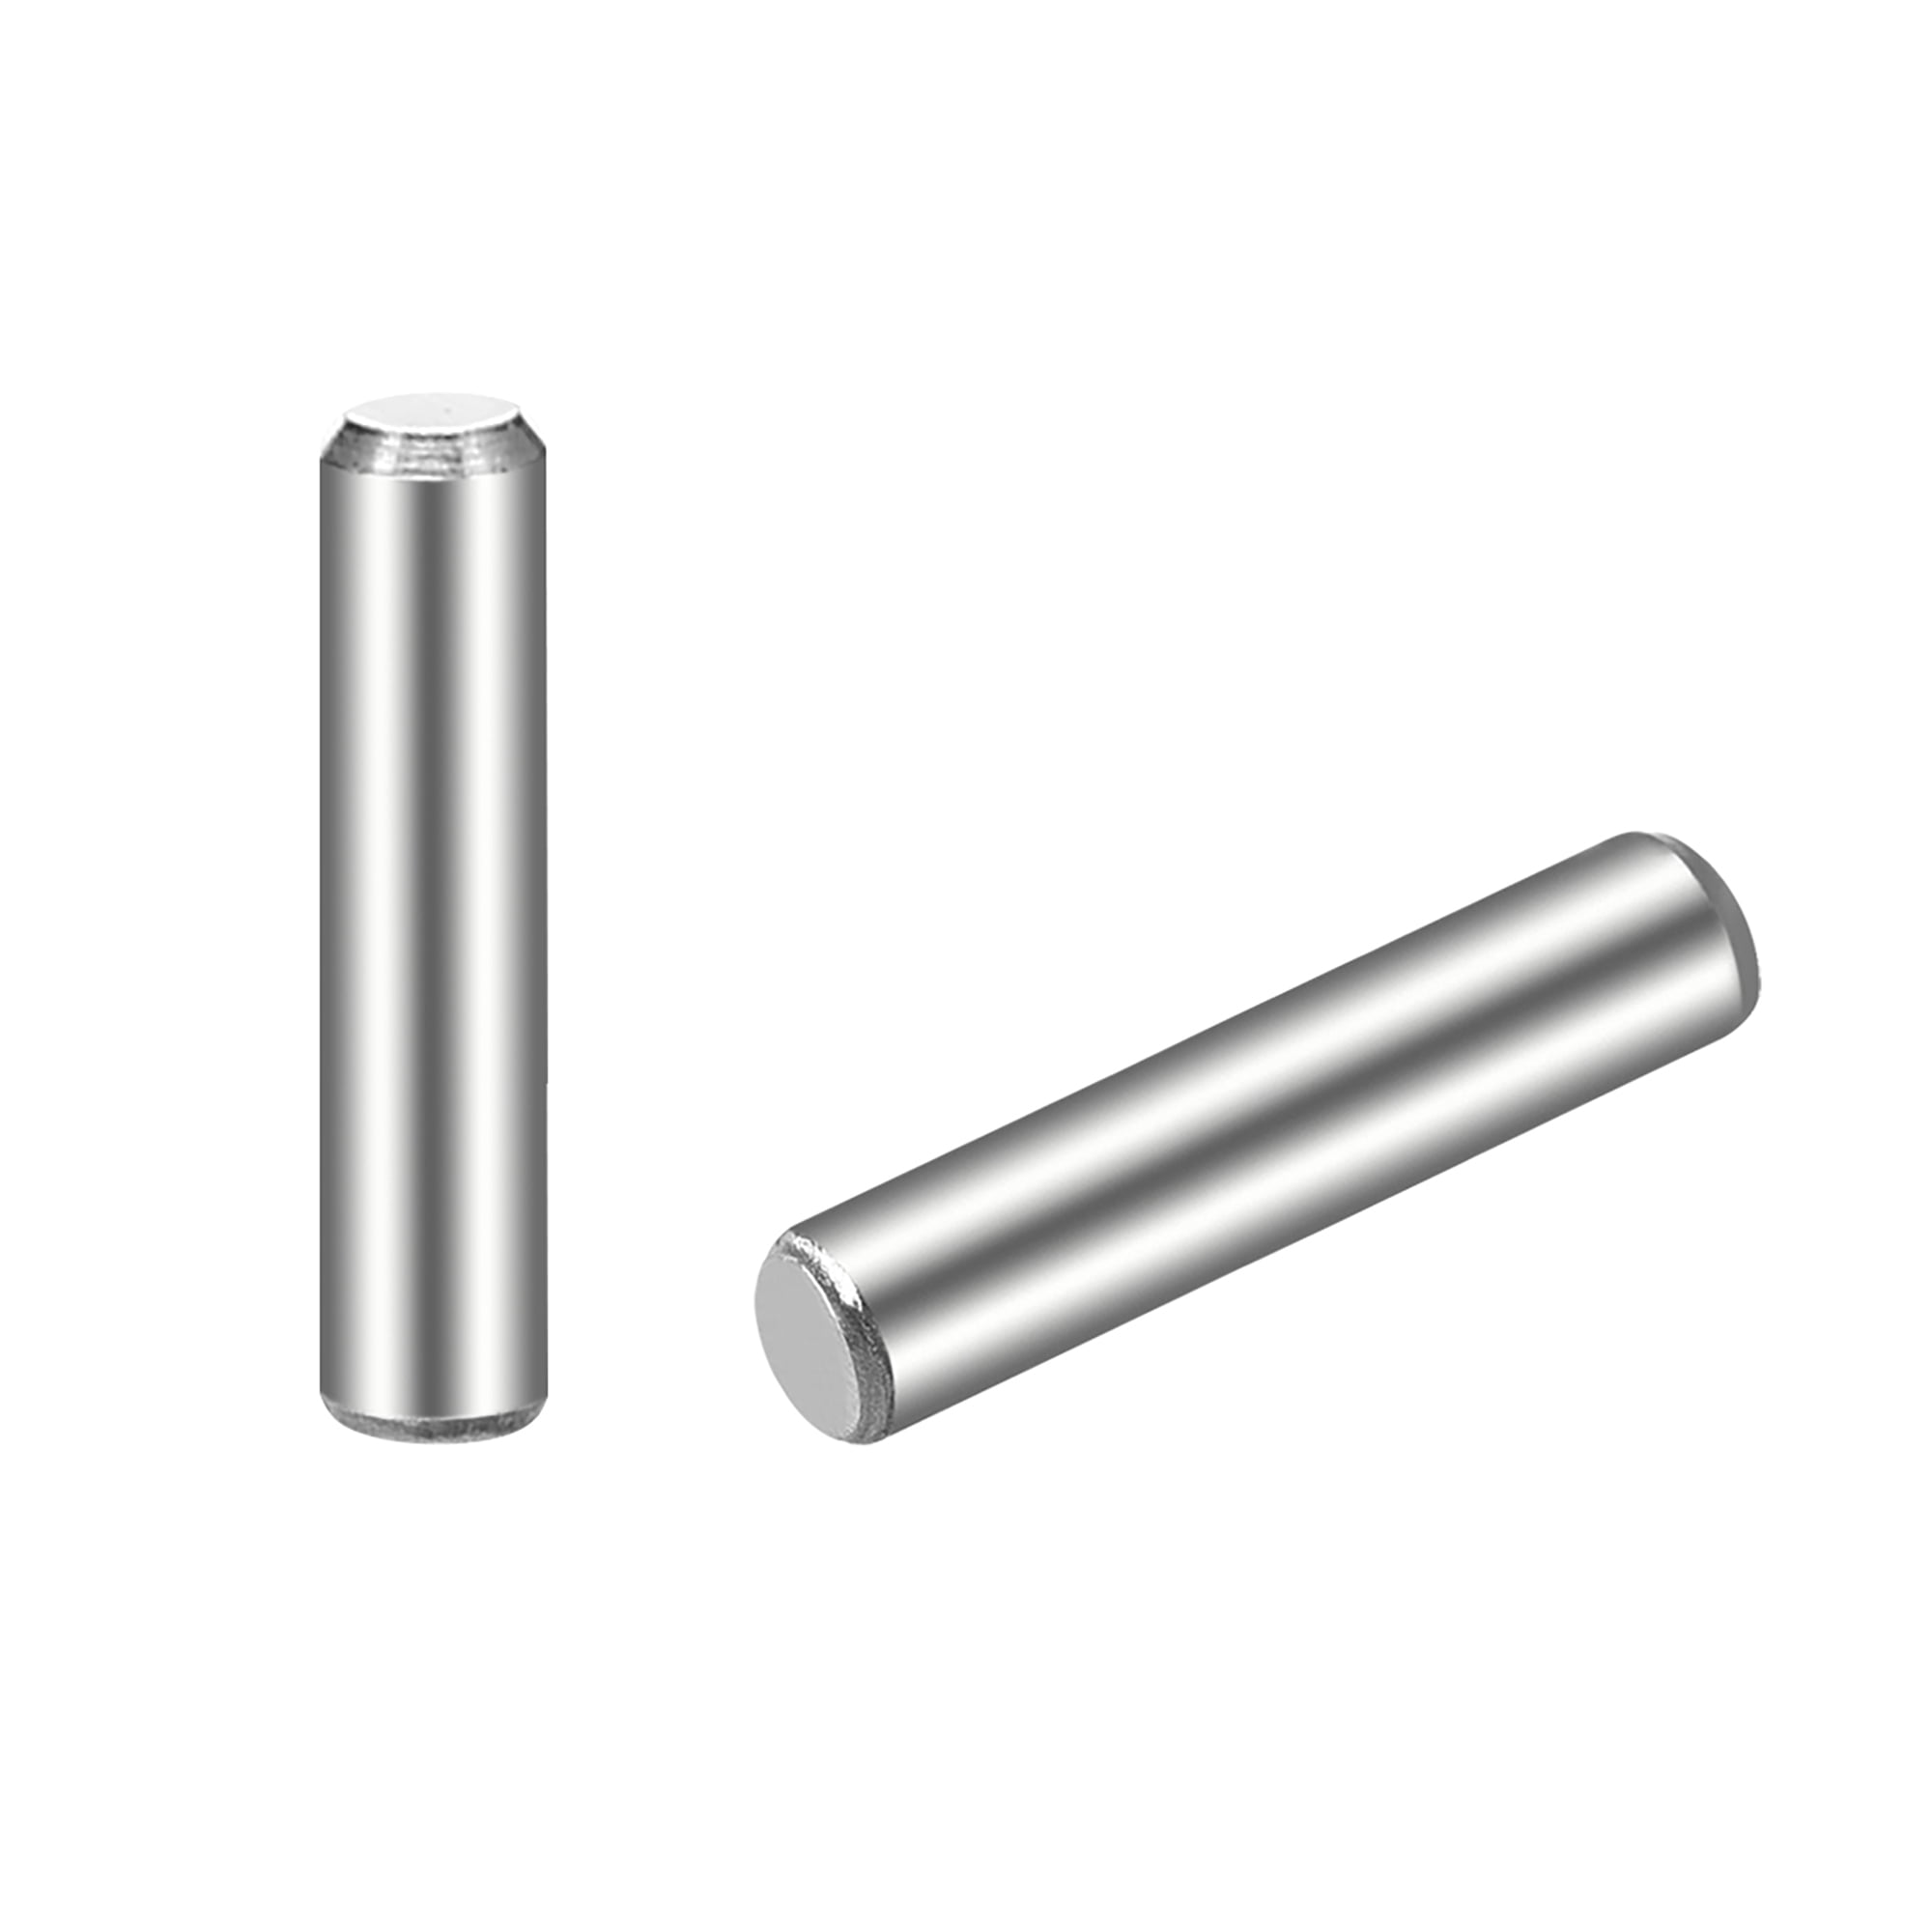 Dowel Pin 304 Stainless Steel Wood Bunk, Bunk Bed Replacement Pins